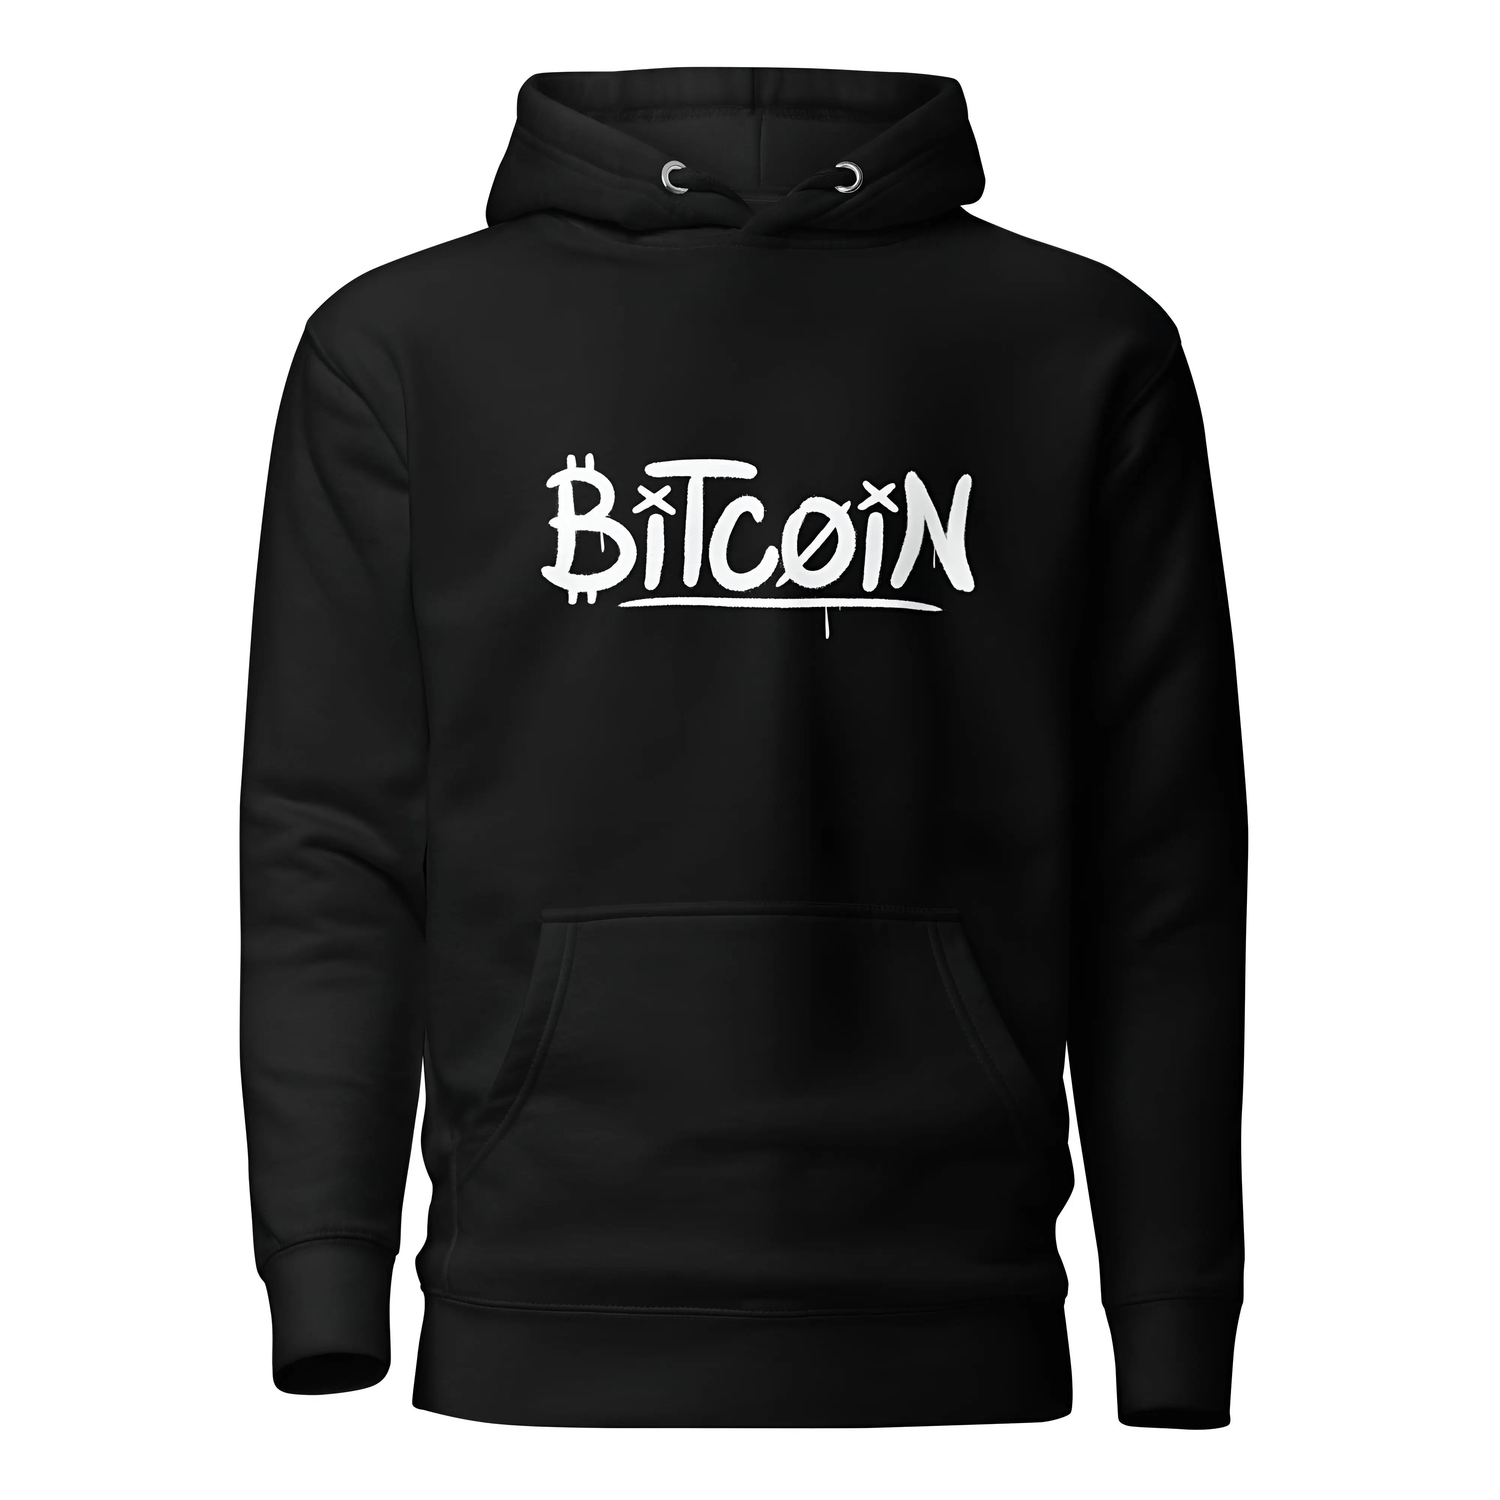 Bitcoin Hoodies - Store of Value